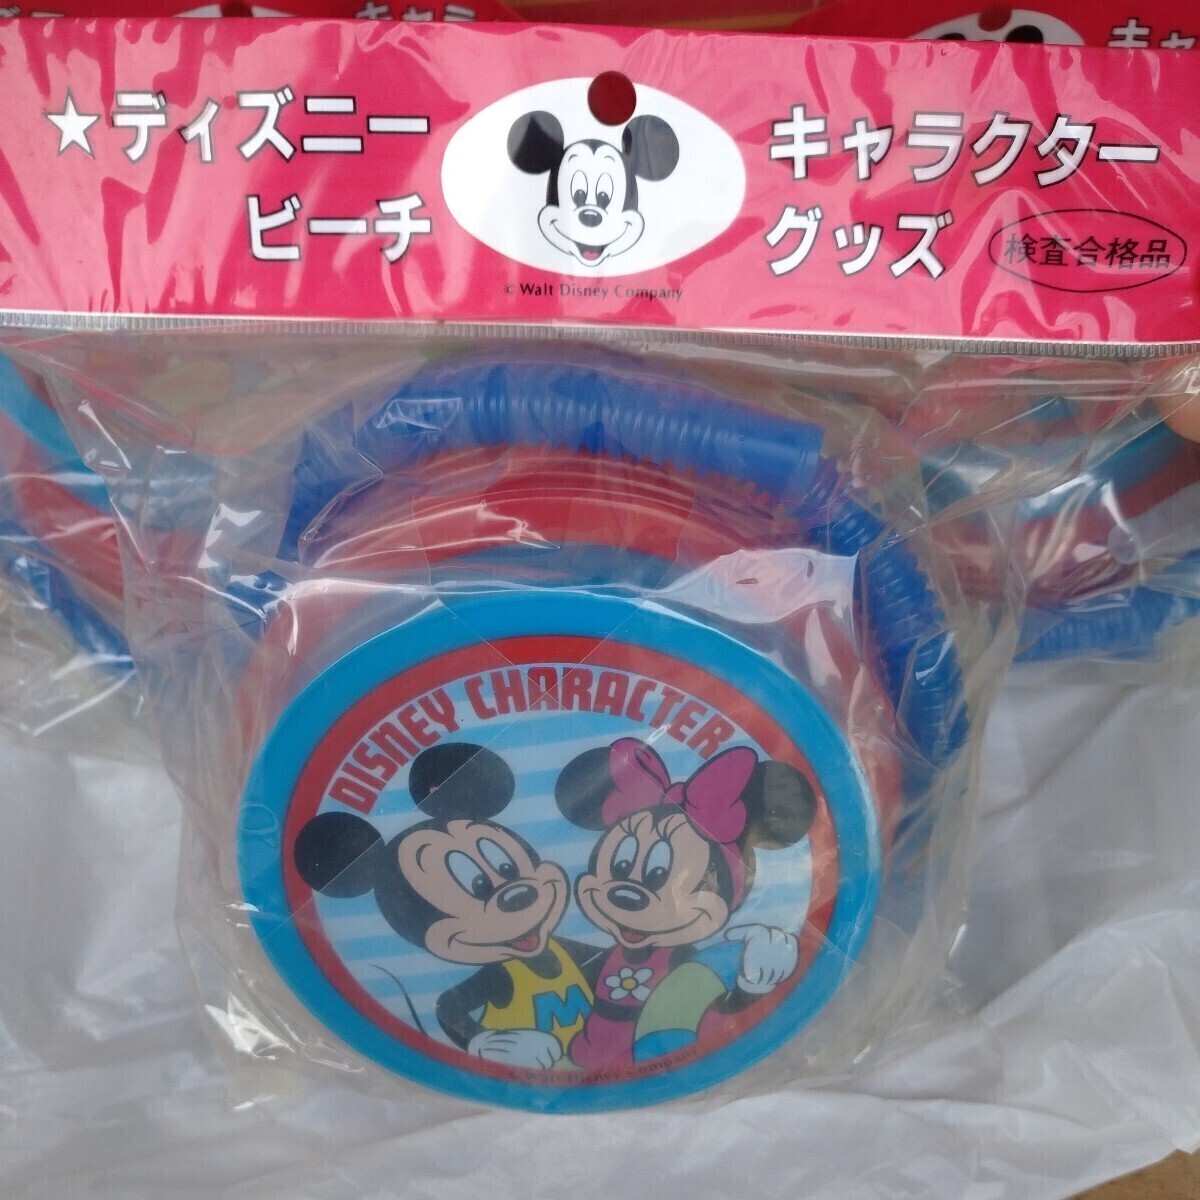 a7 ディズニー ビーチ エアポンプ 3個セット 新品 未使用品 キャラクターグッズ Mickey Mouse Minnie Mouse 浮き輪 プール 海 _画像2